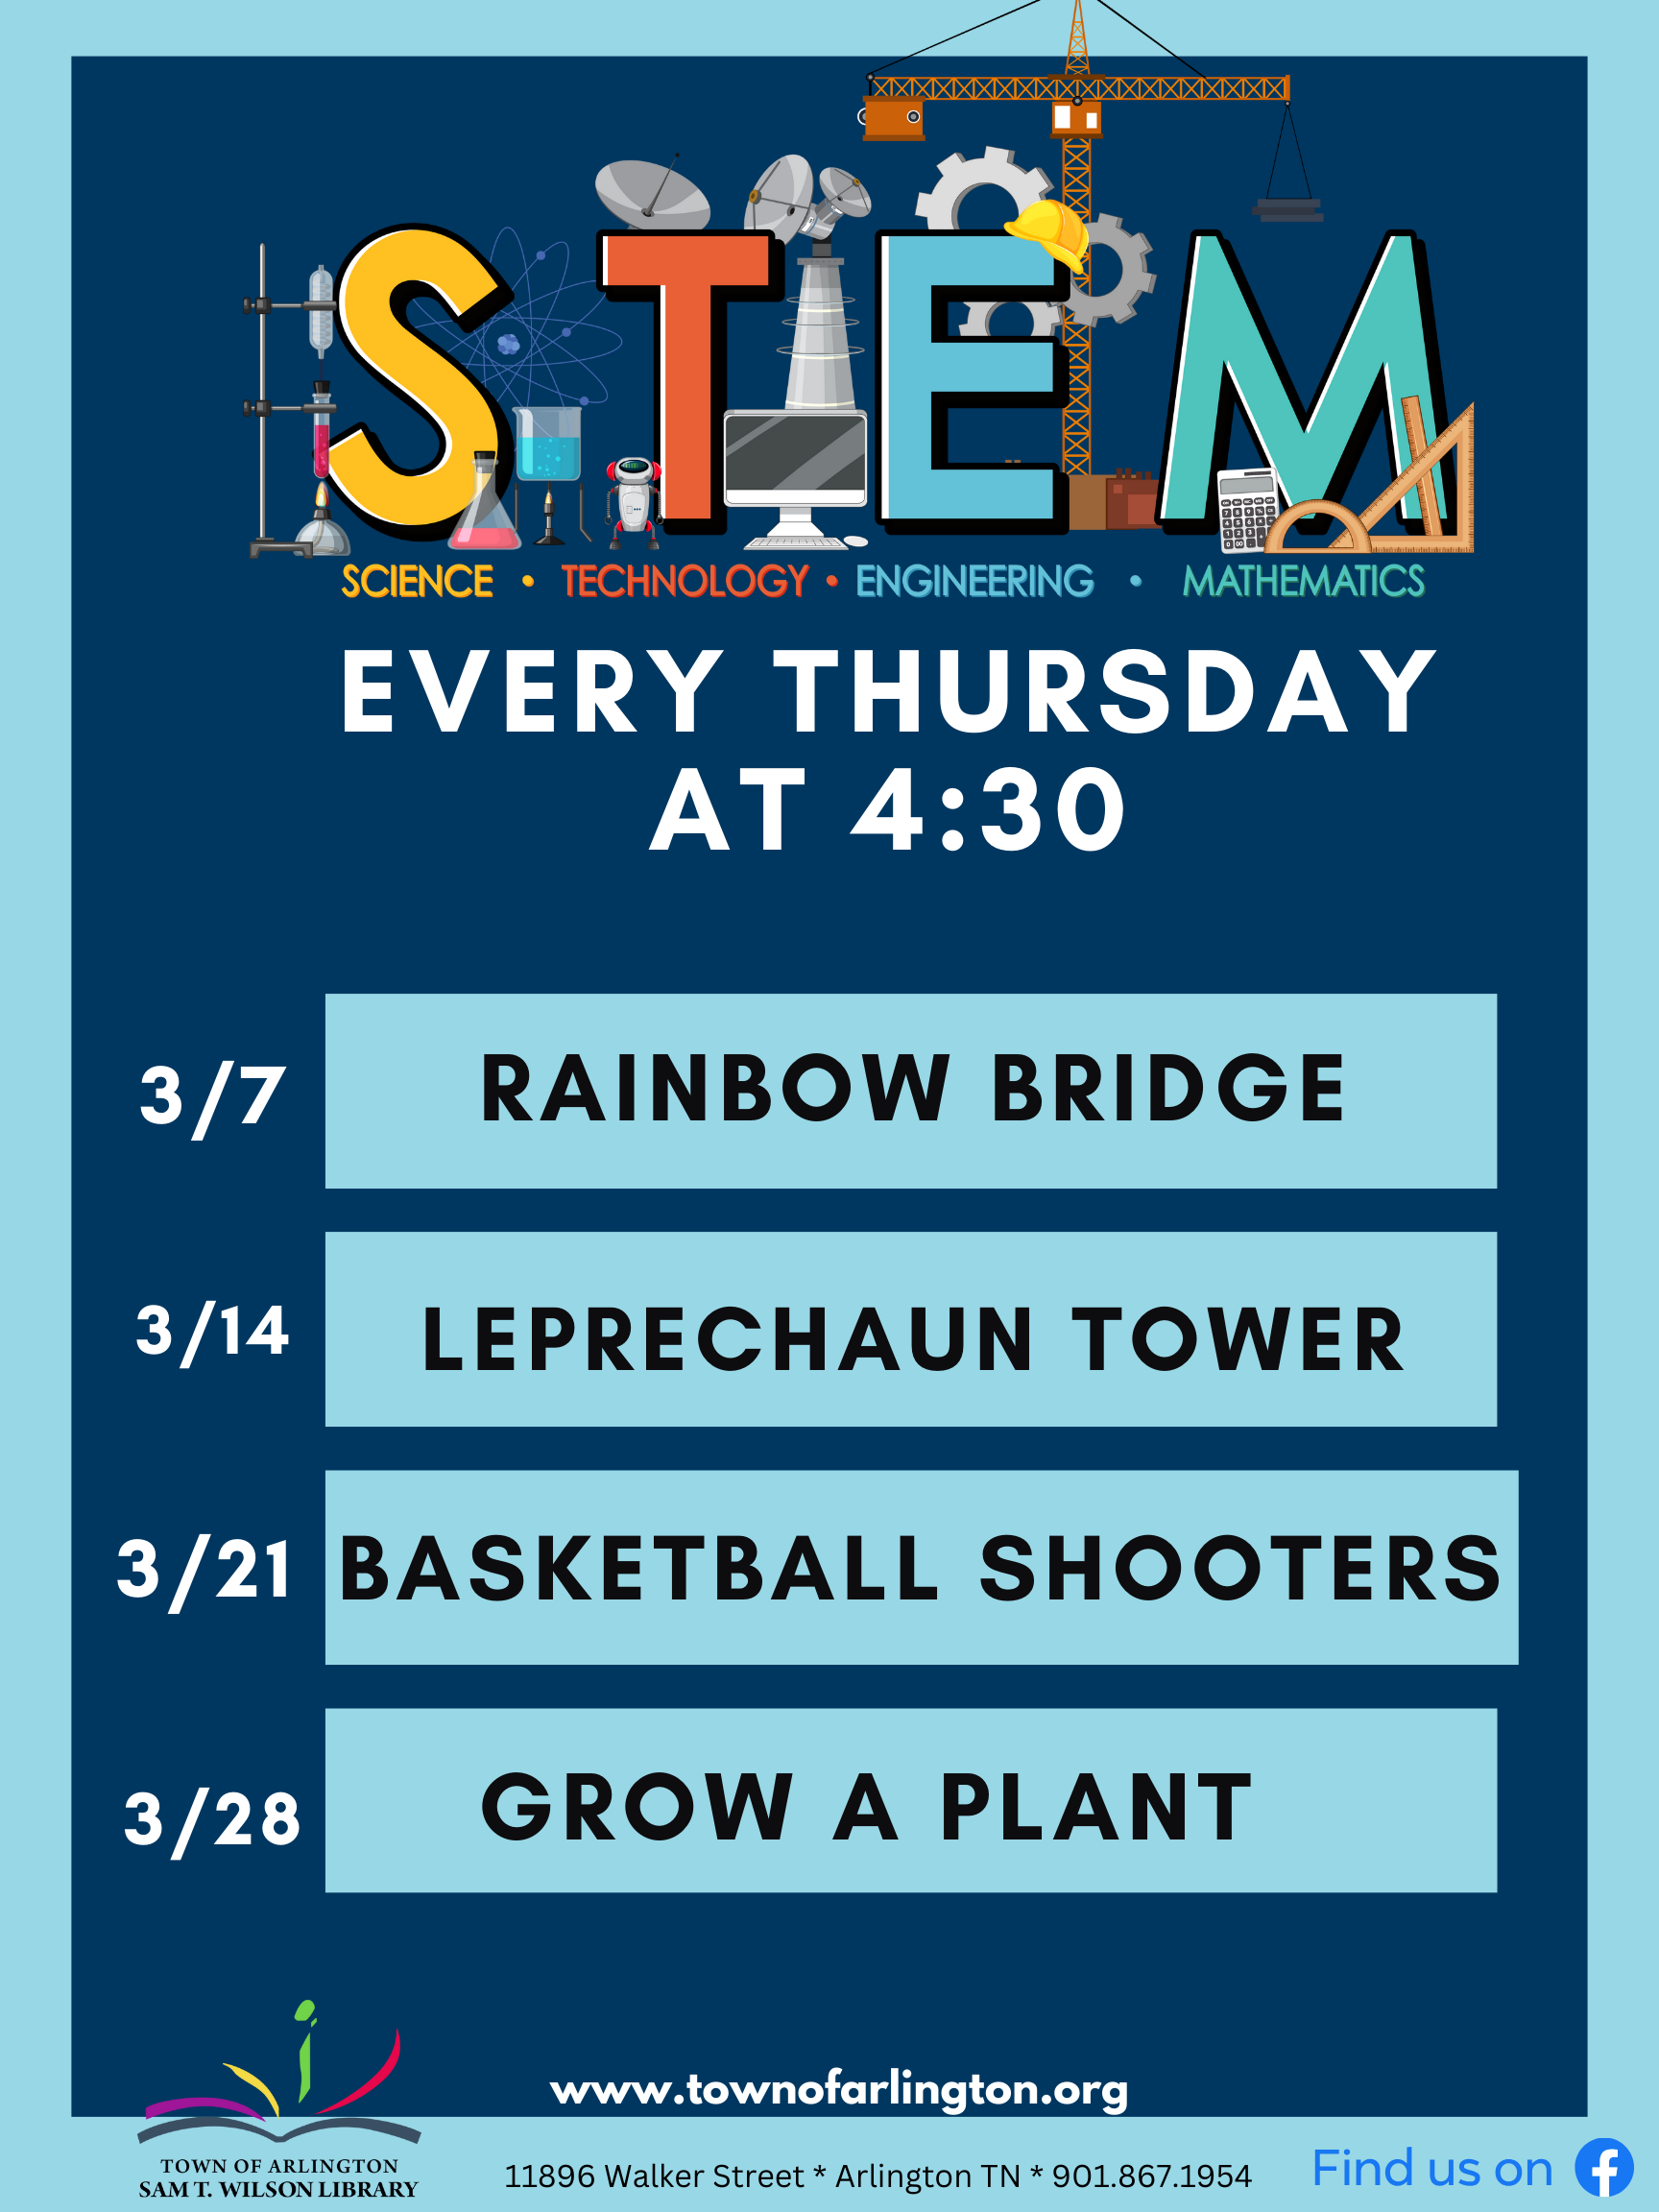 STEM classes on Thursdays at 4:30 in March